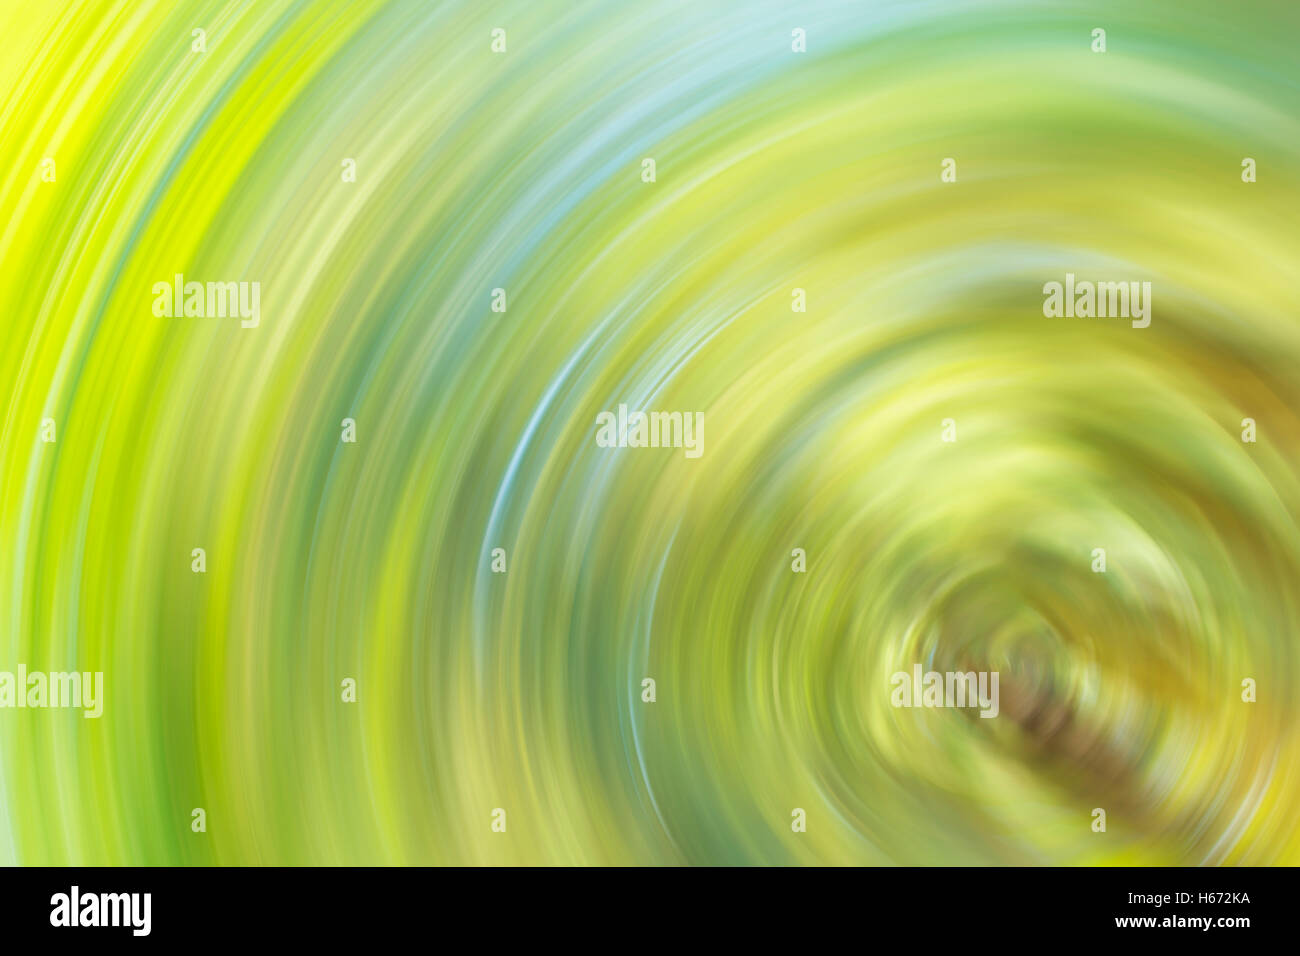 Spinning effect with colors of nature color background. Stock Photo